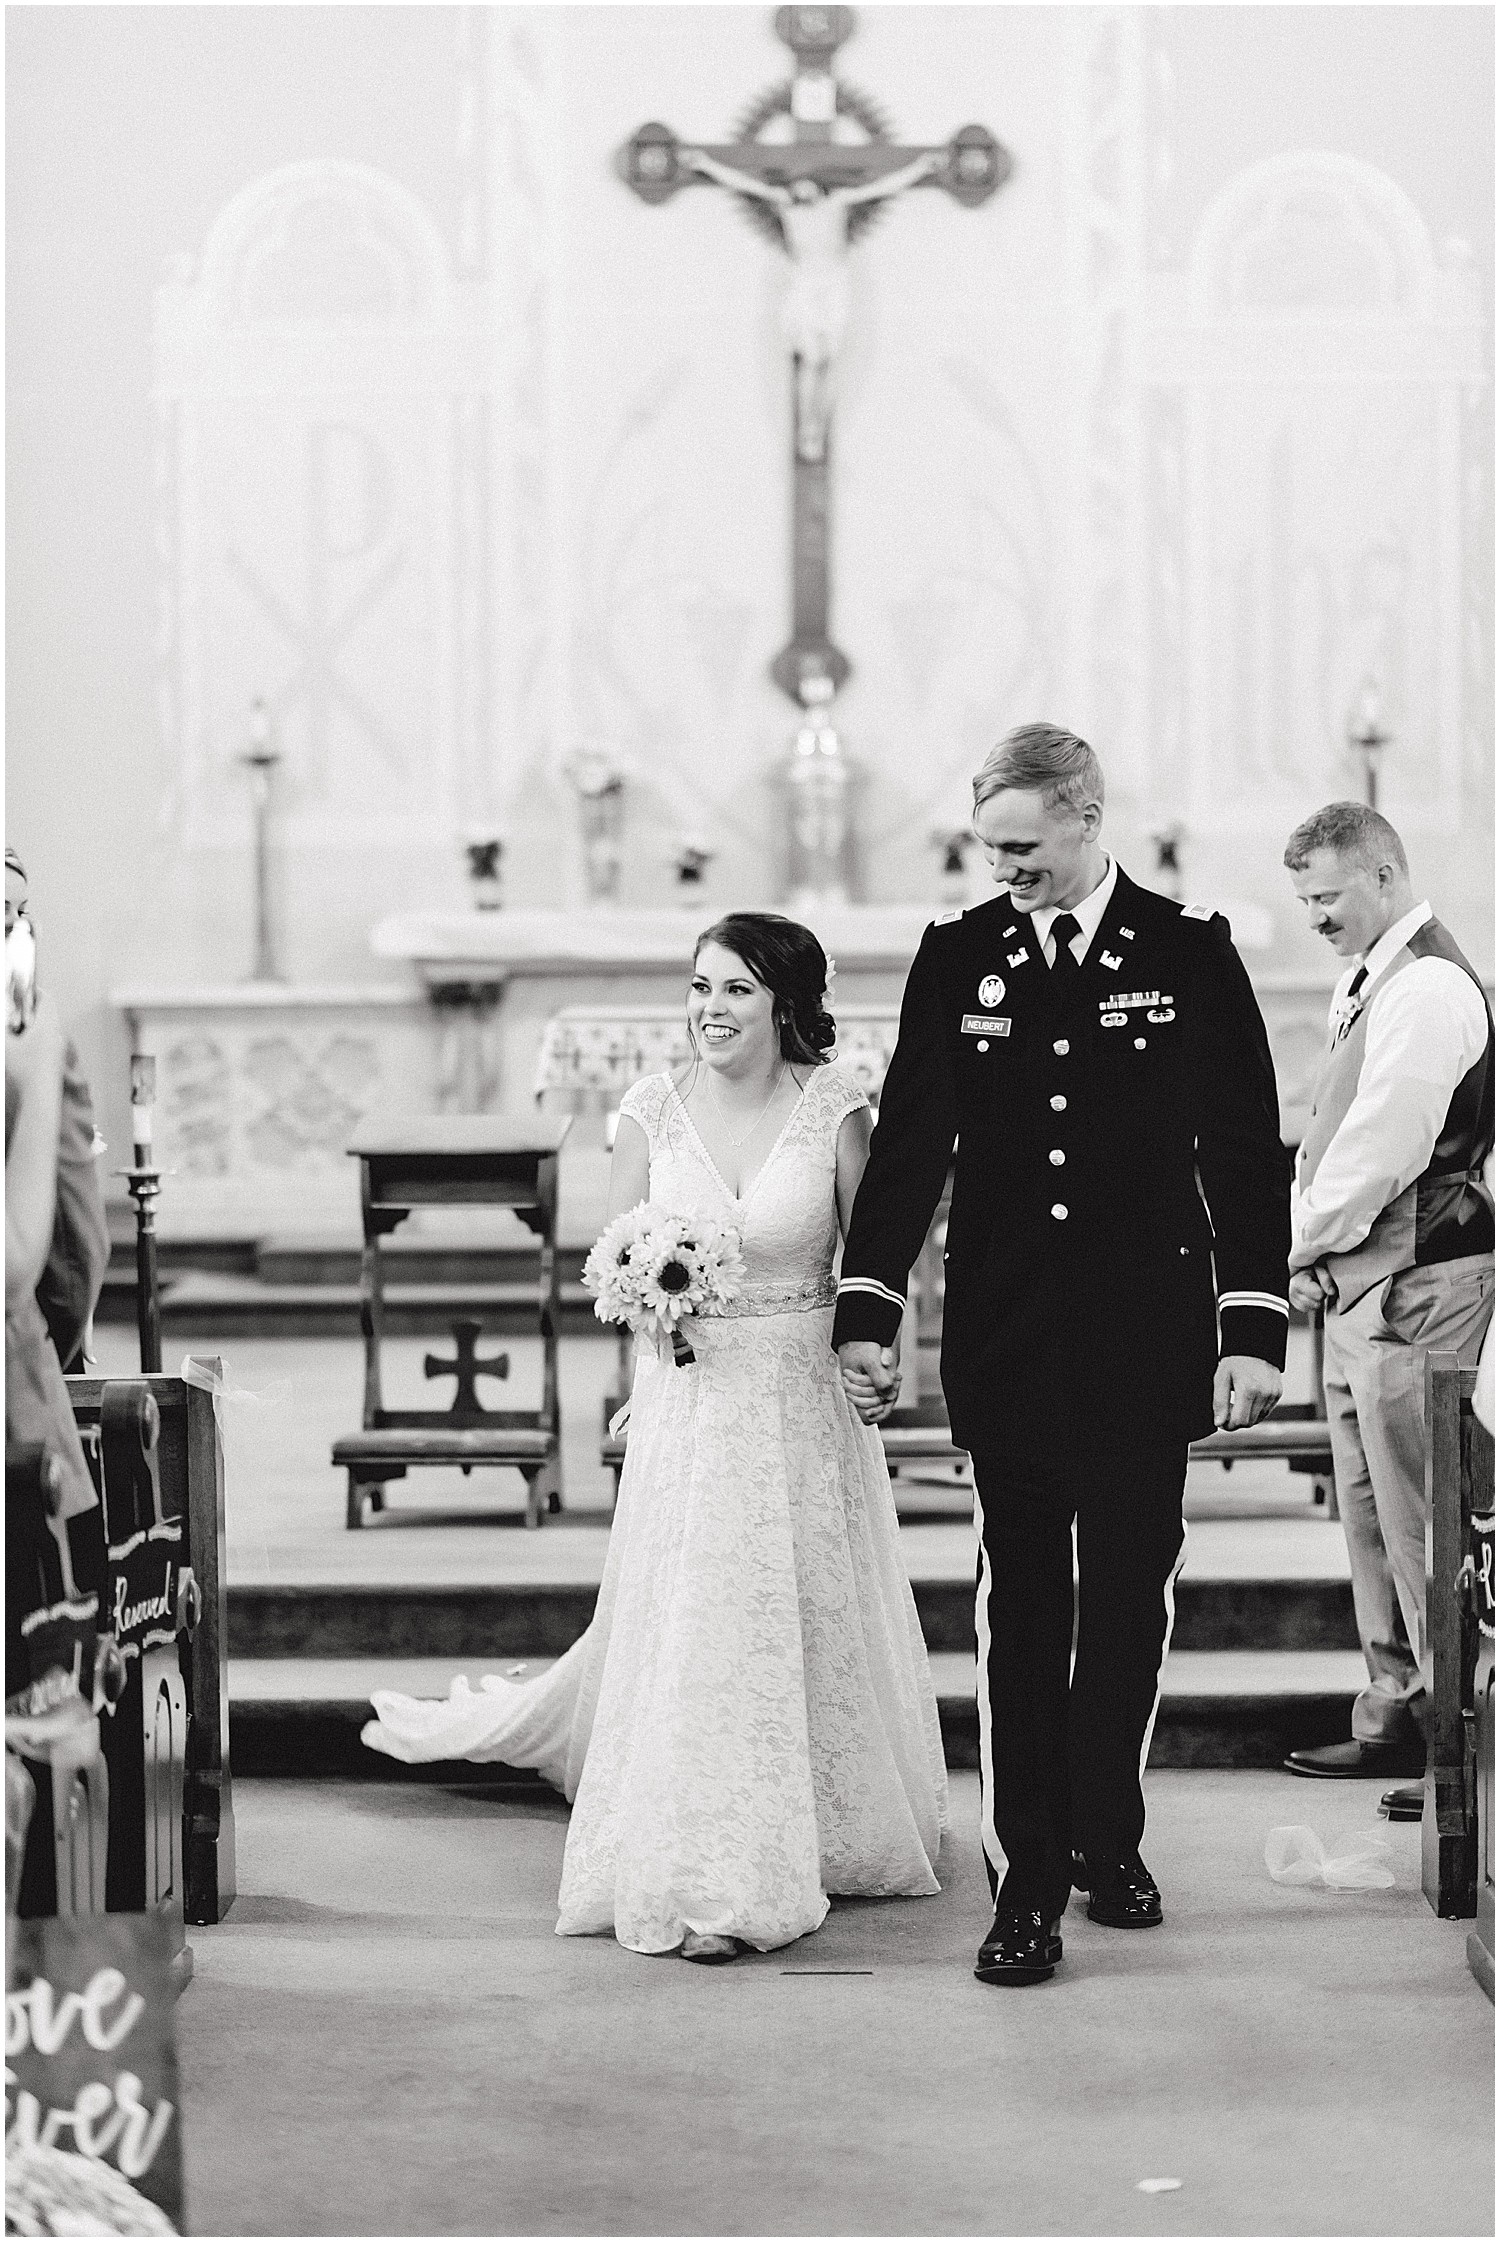 black and white image of bride and groom walking down the aisle together after wedding ceremony